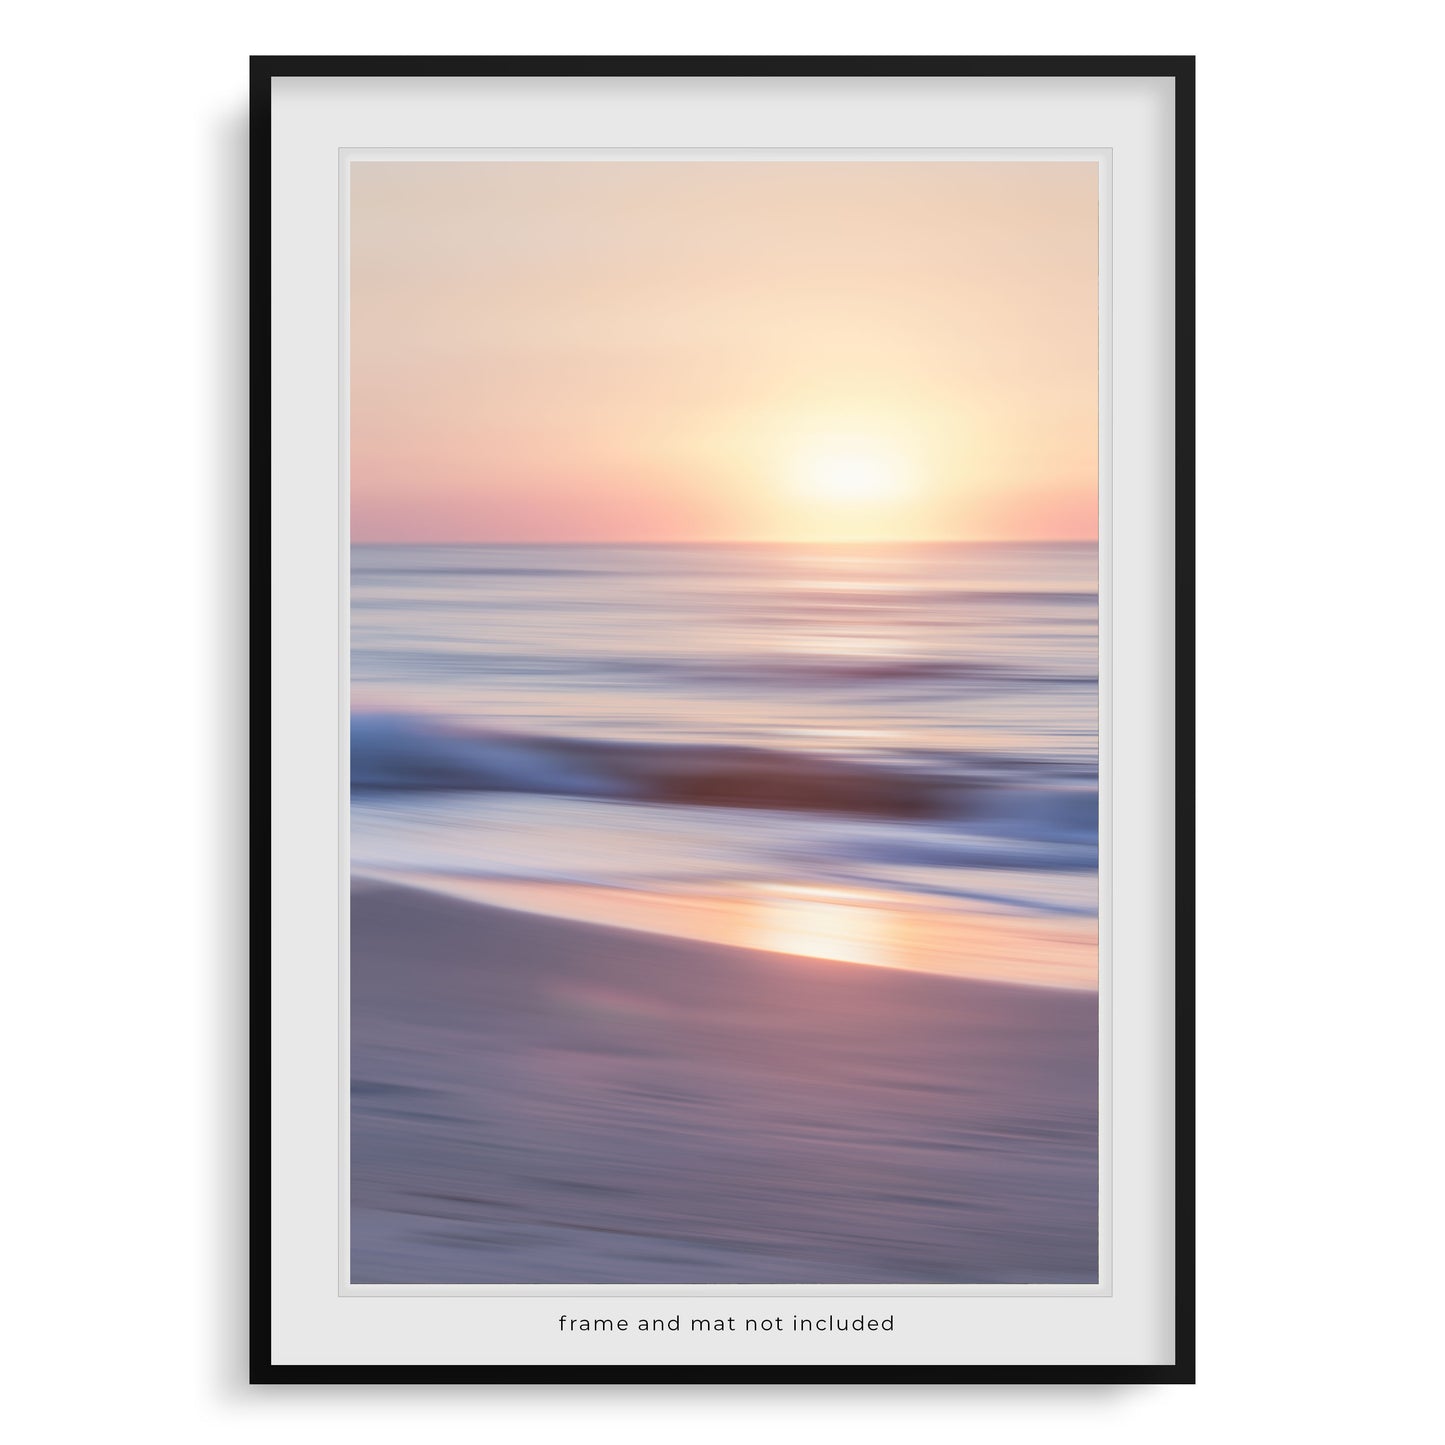 Ocean Sunrise wall art print - frame shown for display only, not included."